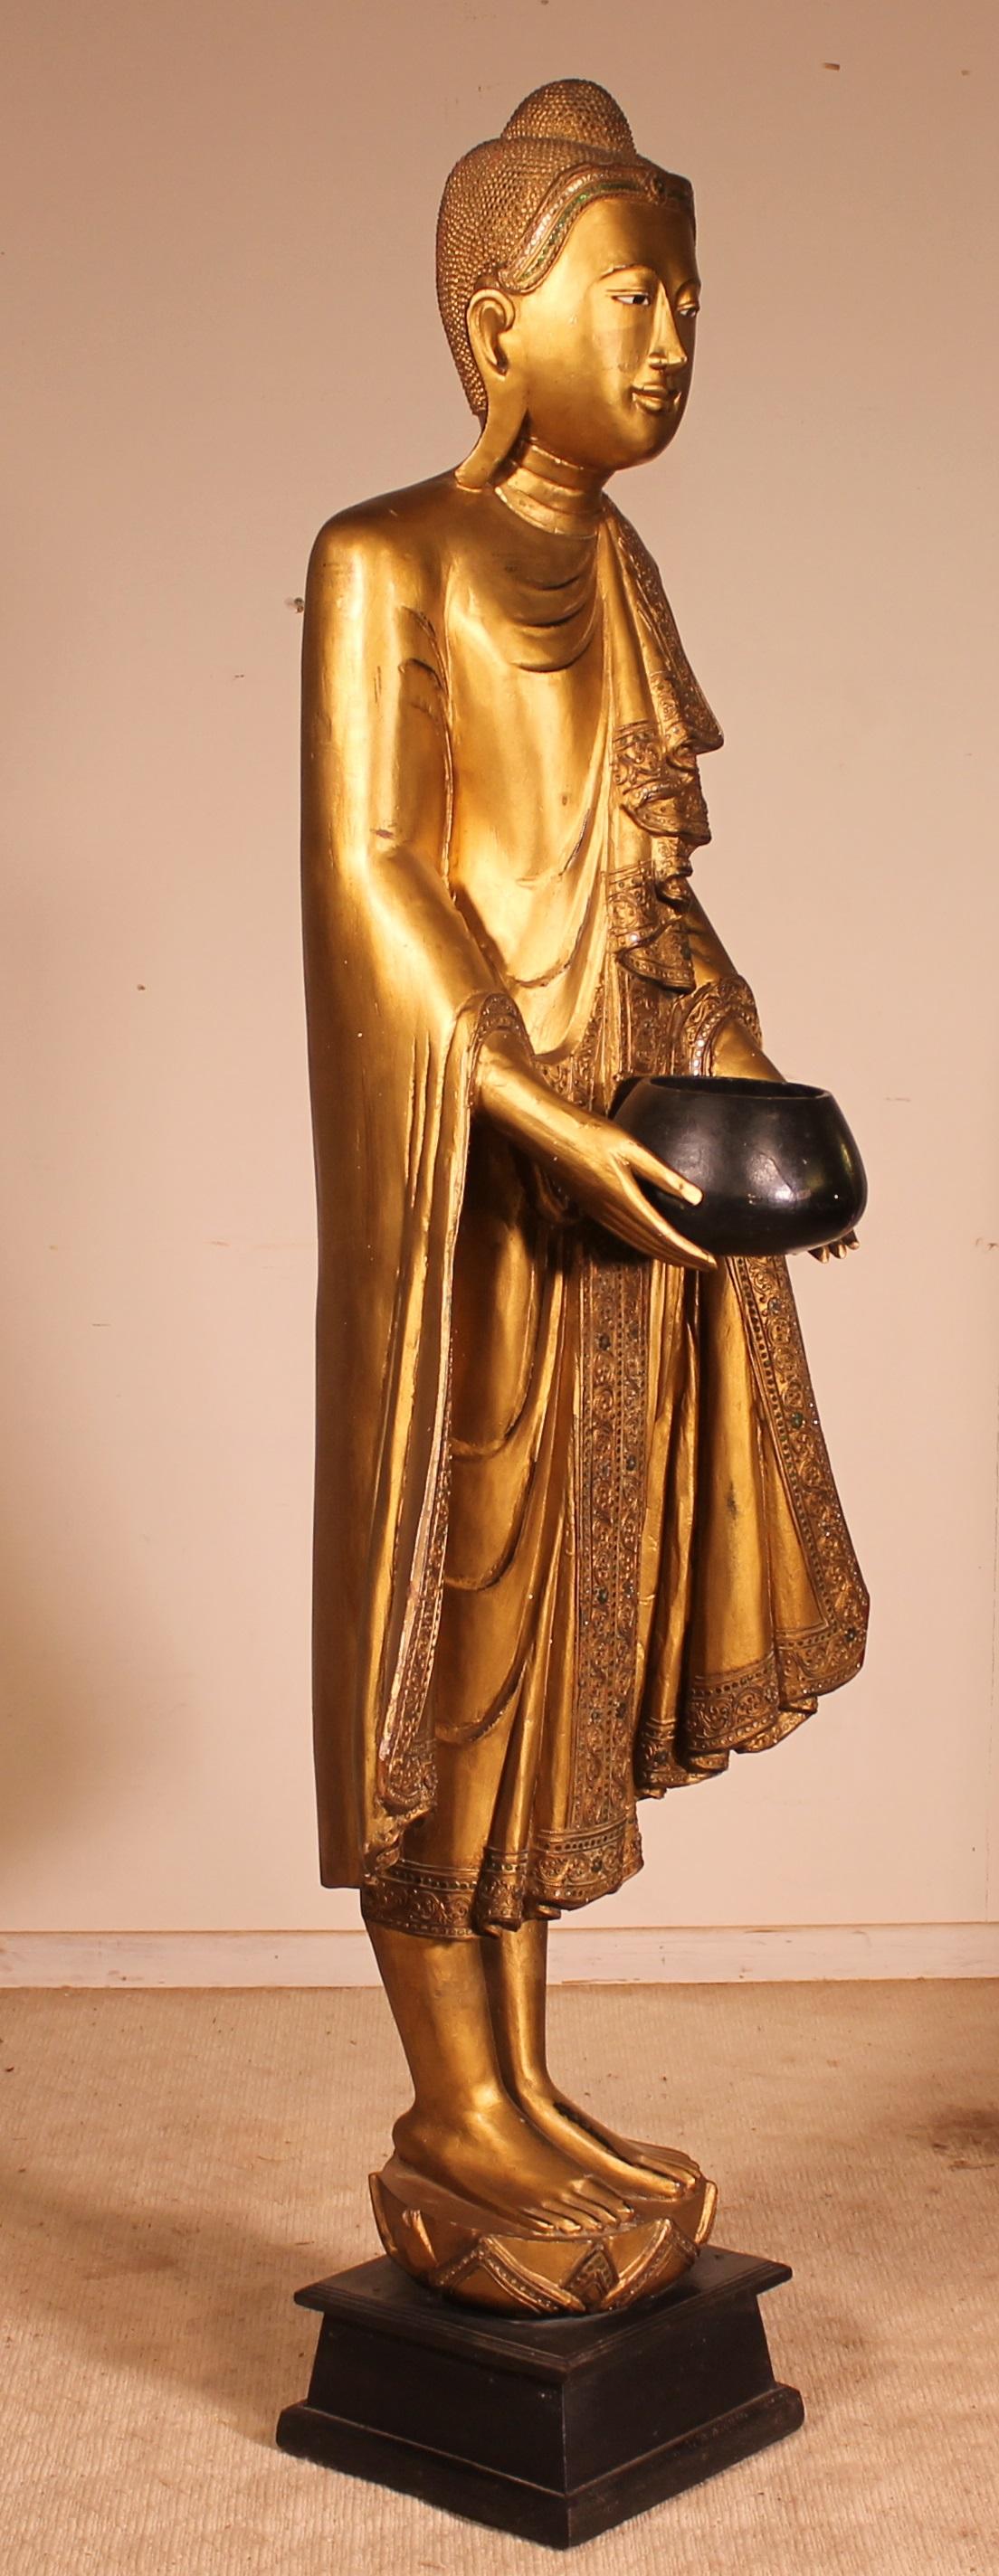 Standing Buddha on a wooden base from the 19th century in Thailand
Elegant large wooden Buddha, Bangkok period
The Buddha is shown holding an offering dish
Beautiful decoration

Measures: height 1m67cm, width 60cm, depth 36cm.